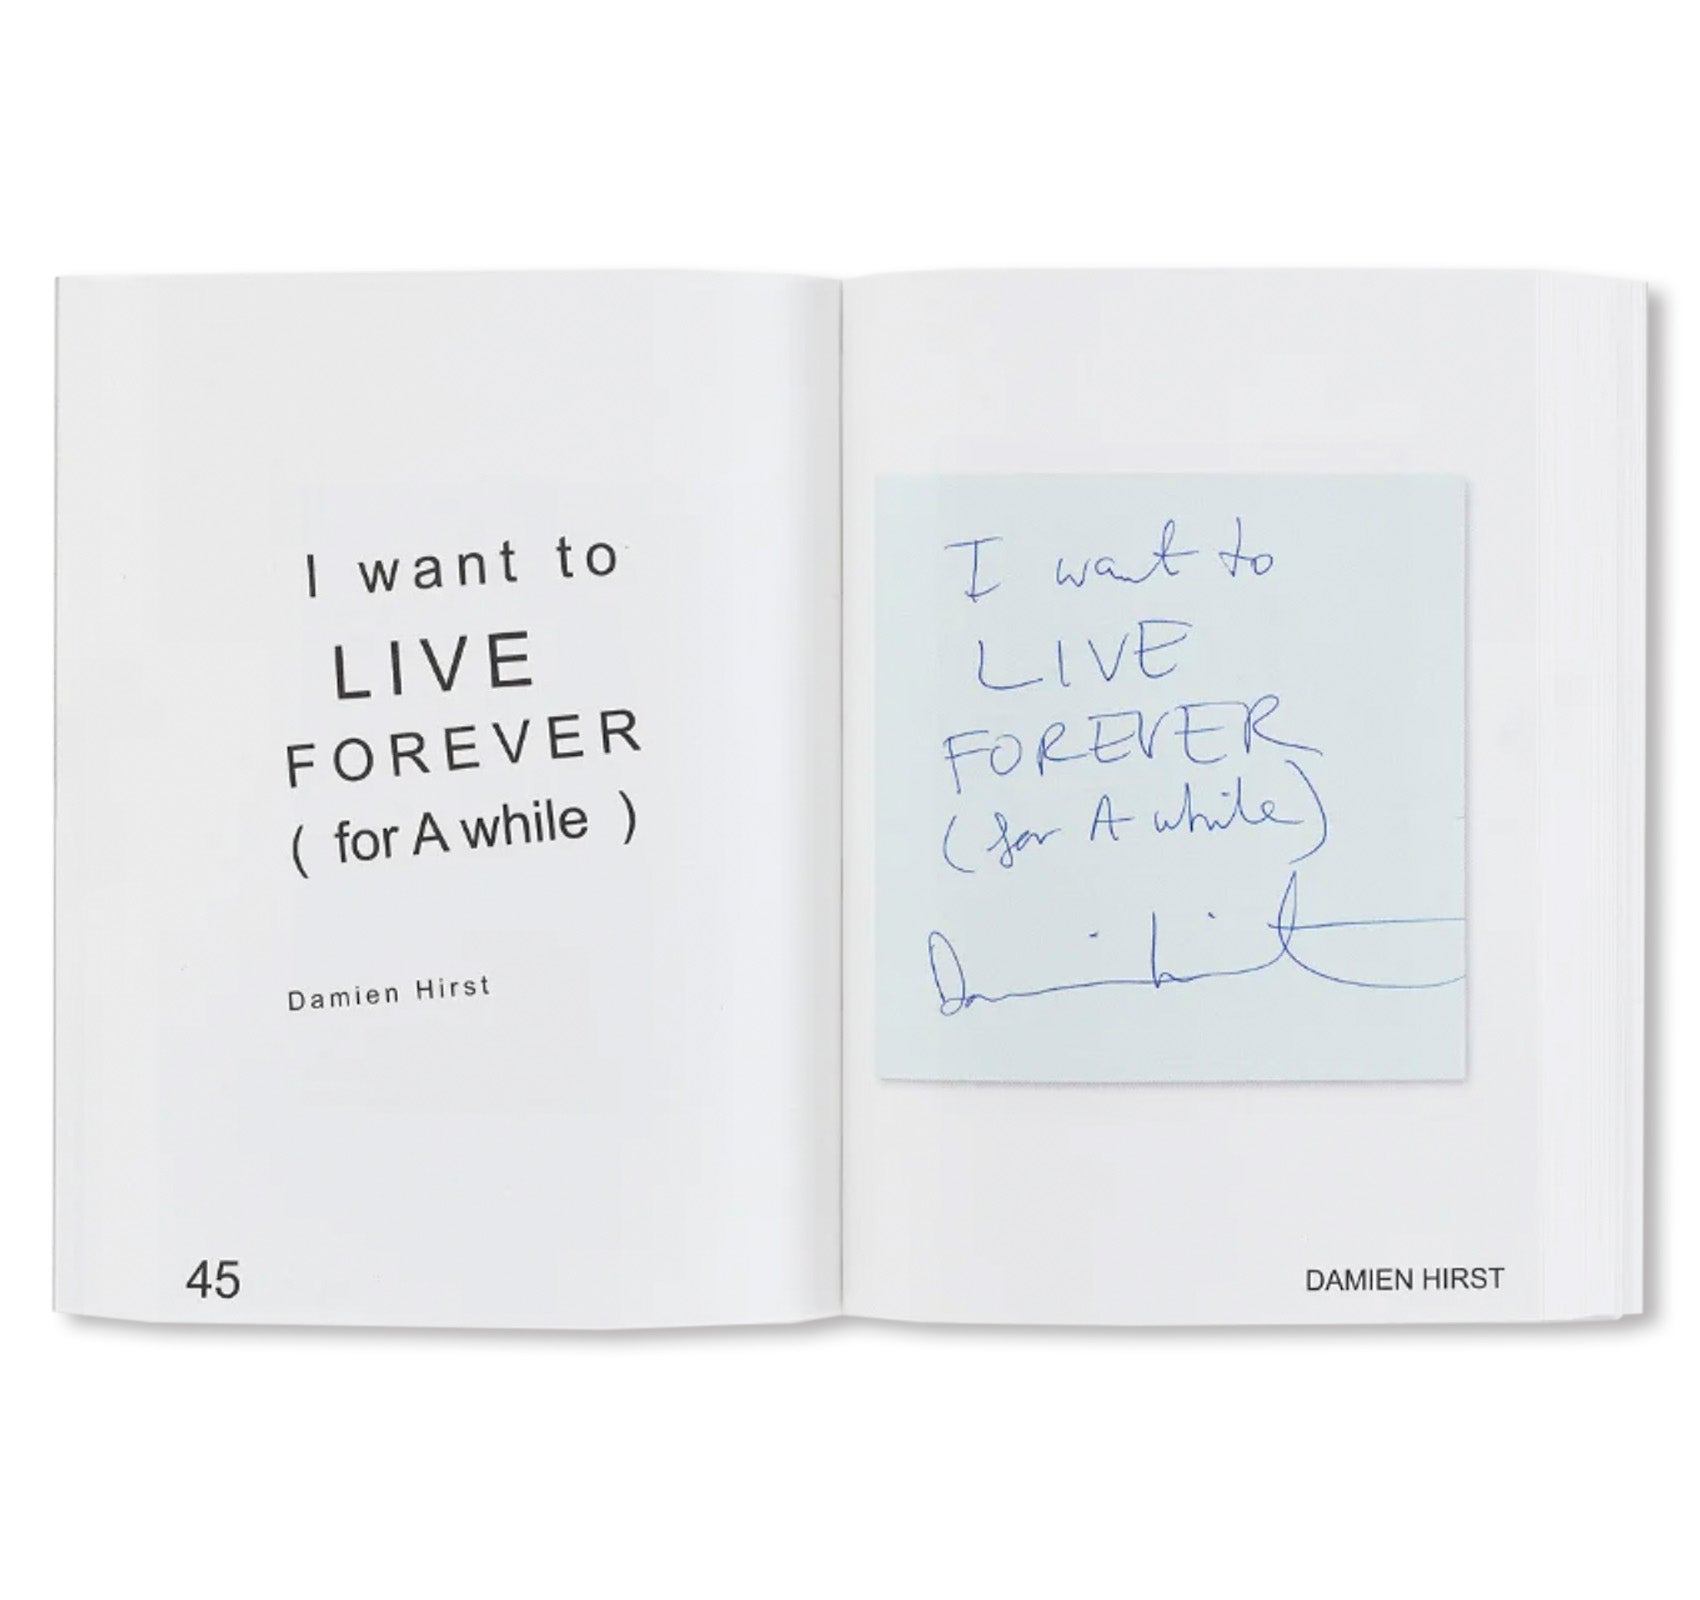 REMEMBER TO DREAM! by Hans Ulrich Obrist